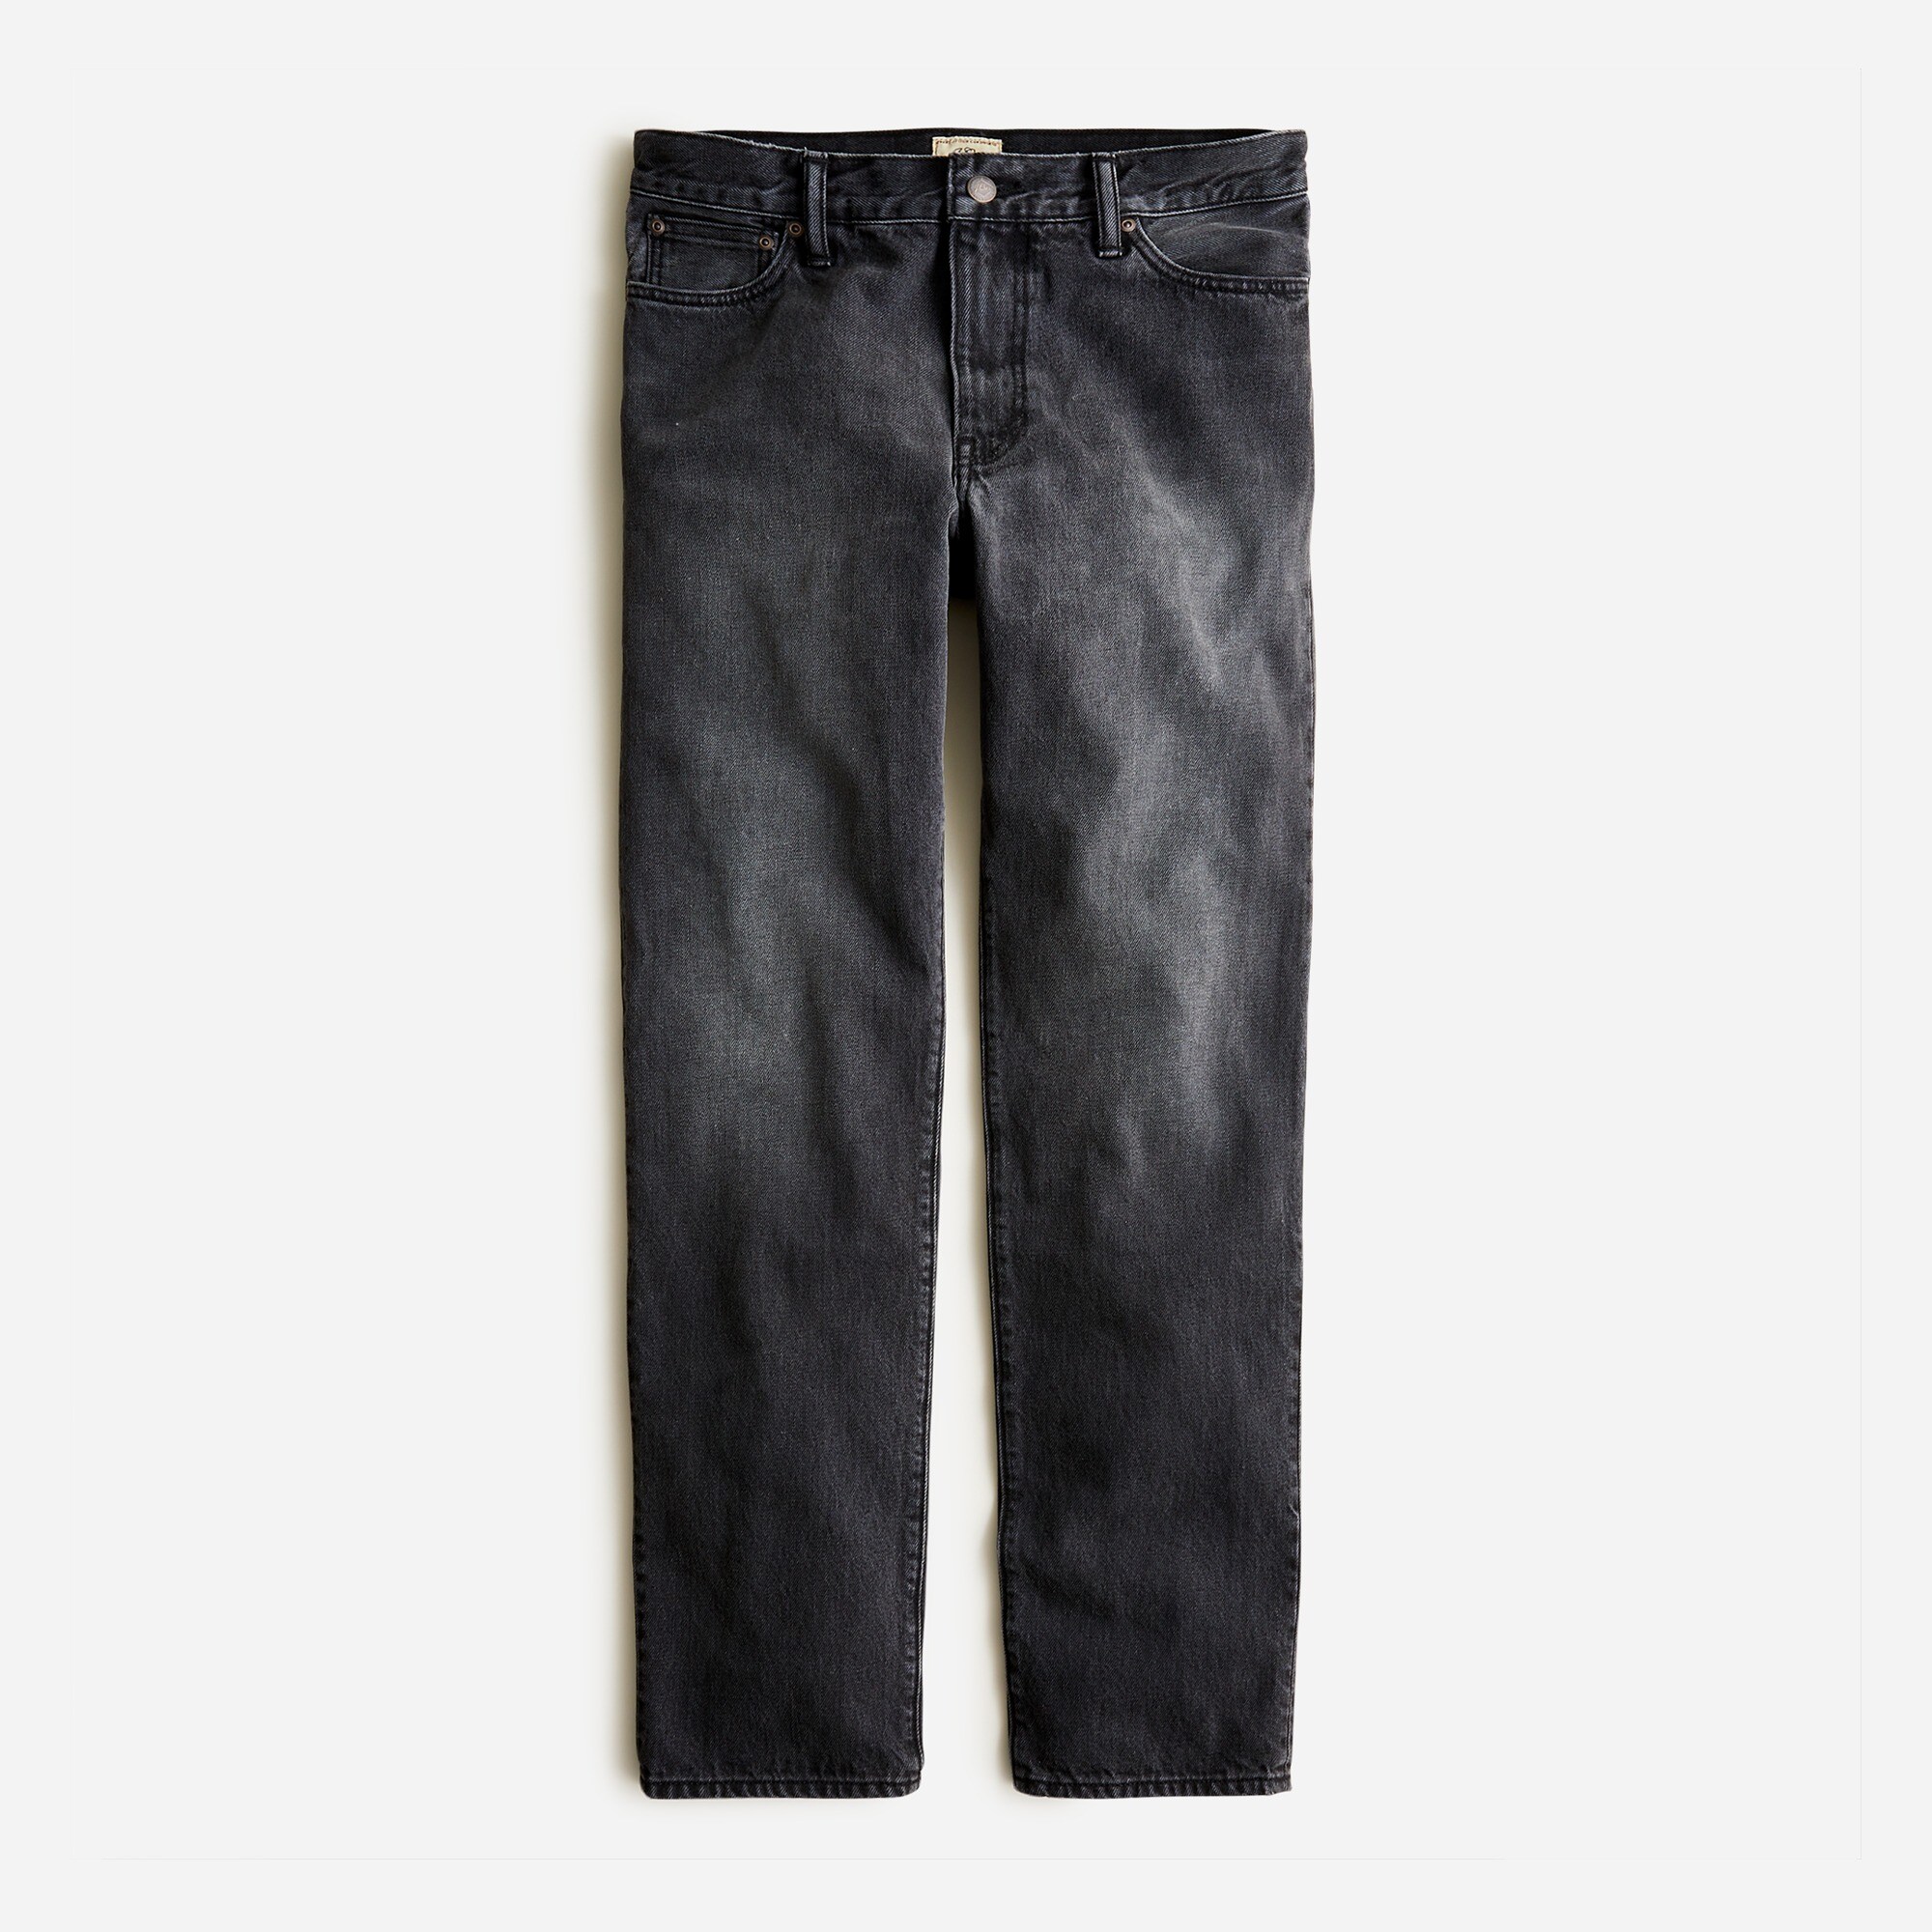  Classic Straight-fit jean in deep grey wash